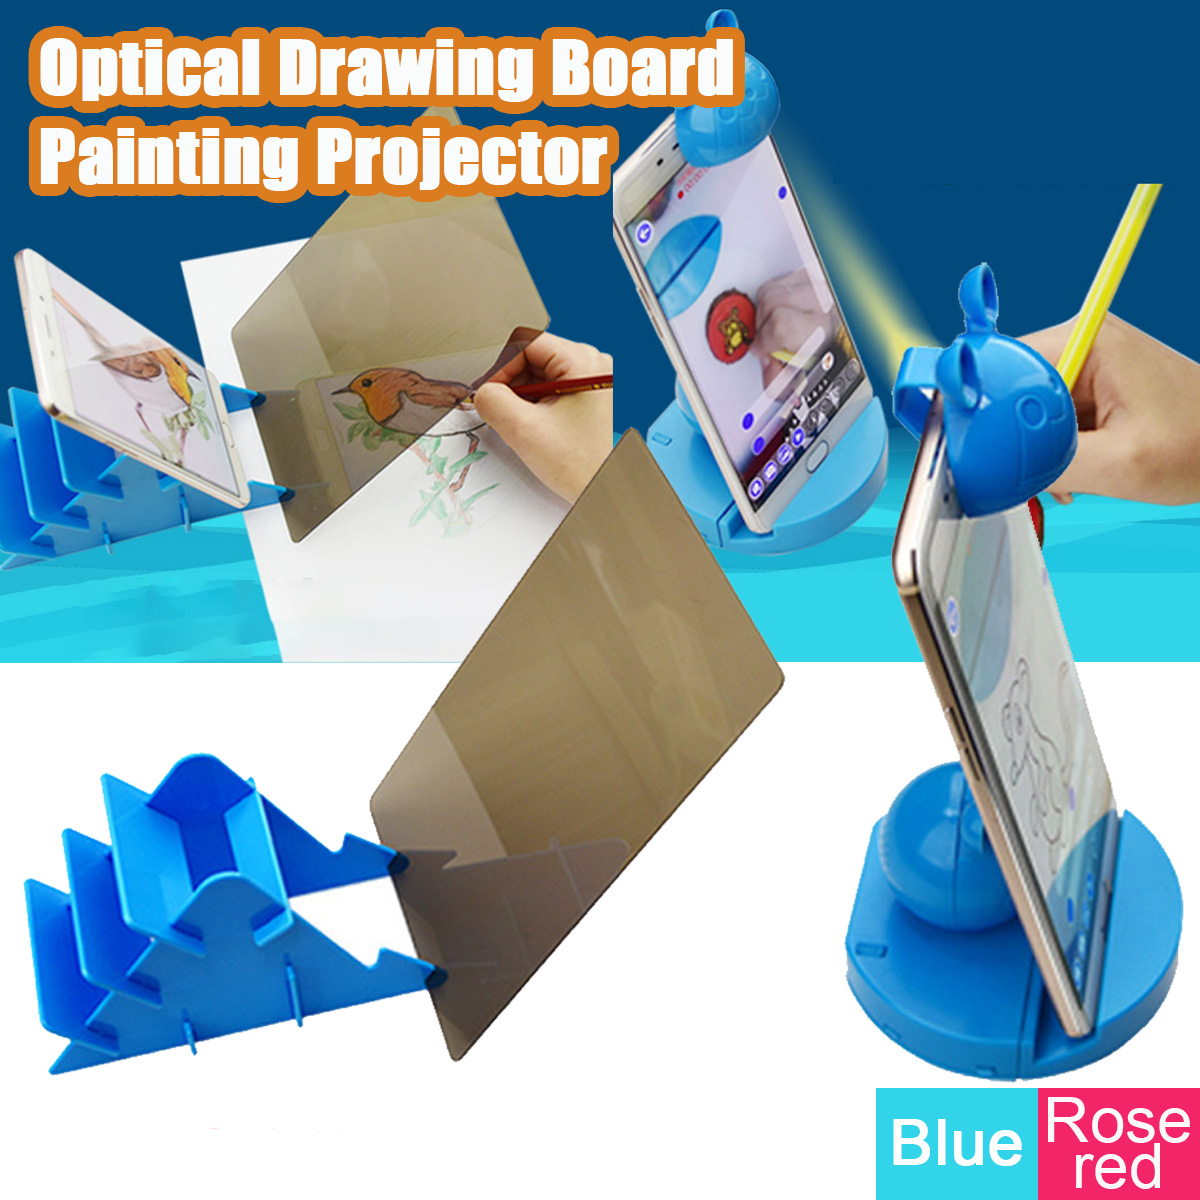 Kids-Children-Optical-Drawing-Tracing-Board-Sketch-Drawing-Mobile-Projector-Painting-1632467-1